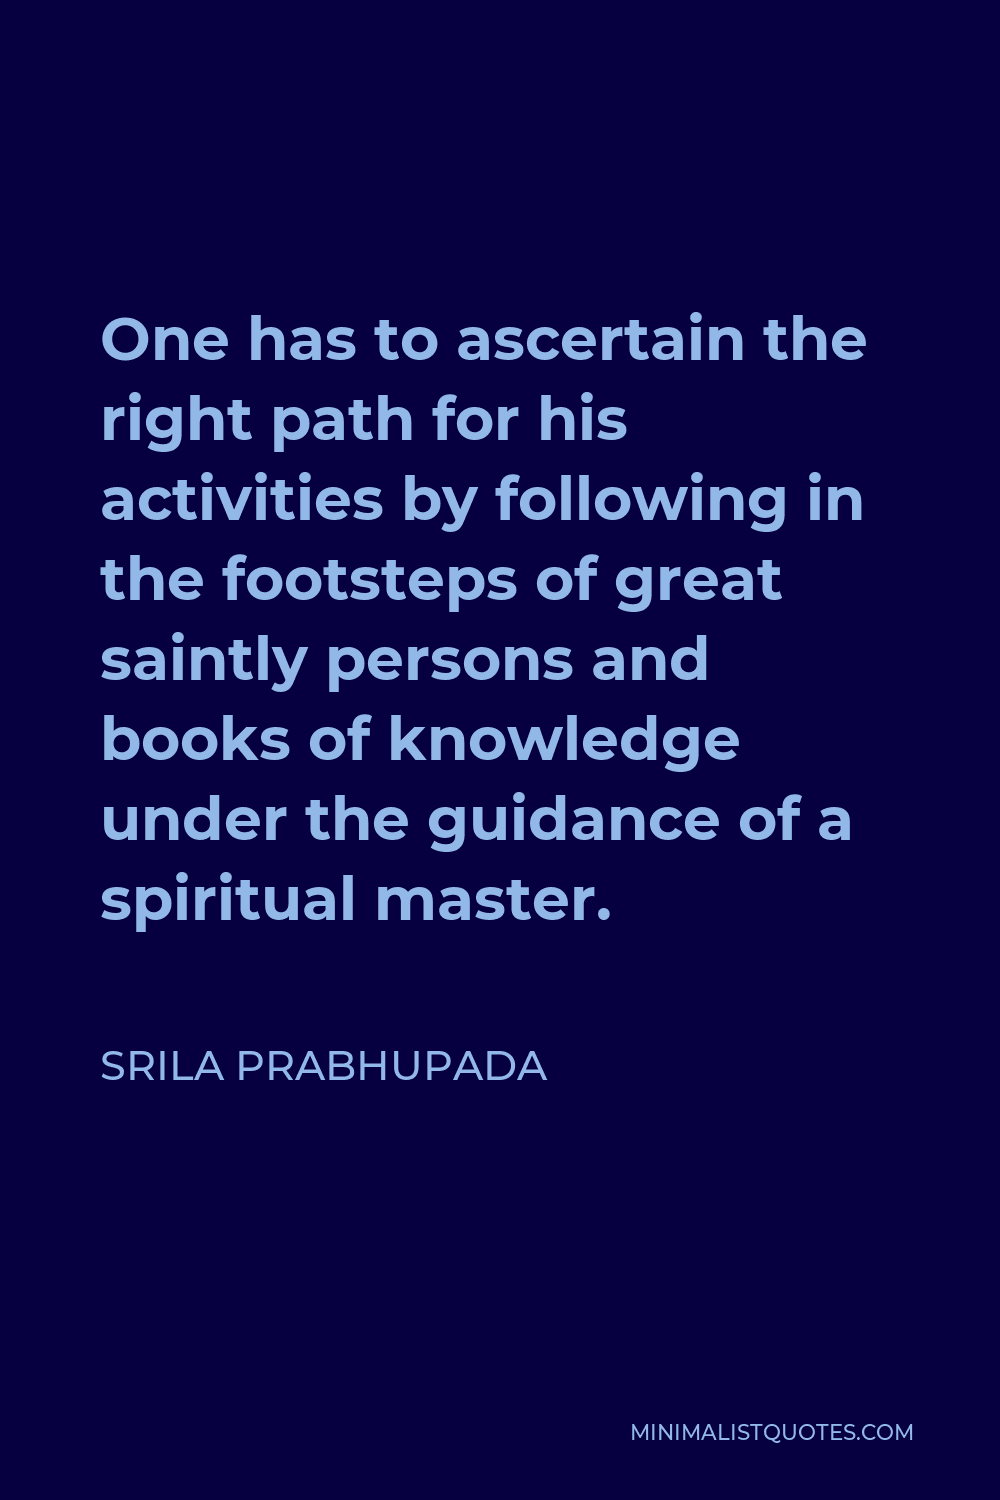 Srila Prabhupada Quote - One has to ascertain the right path for his activities by following in the footsteps of great saintly persons and books of knowledge under the guidance of a spiritual master.